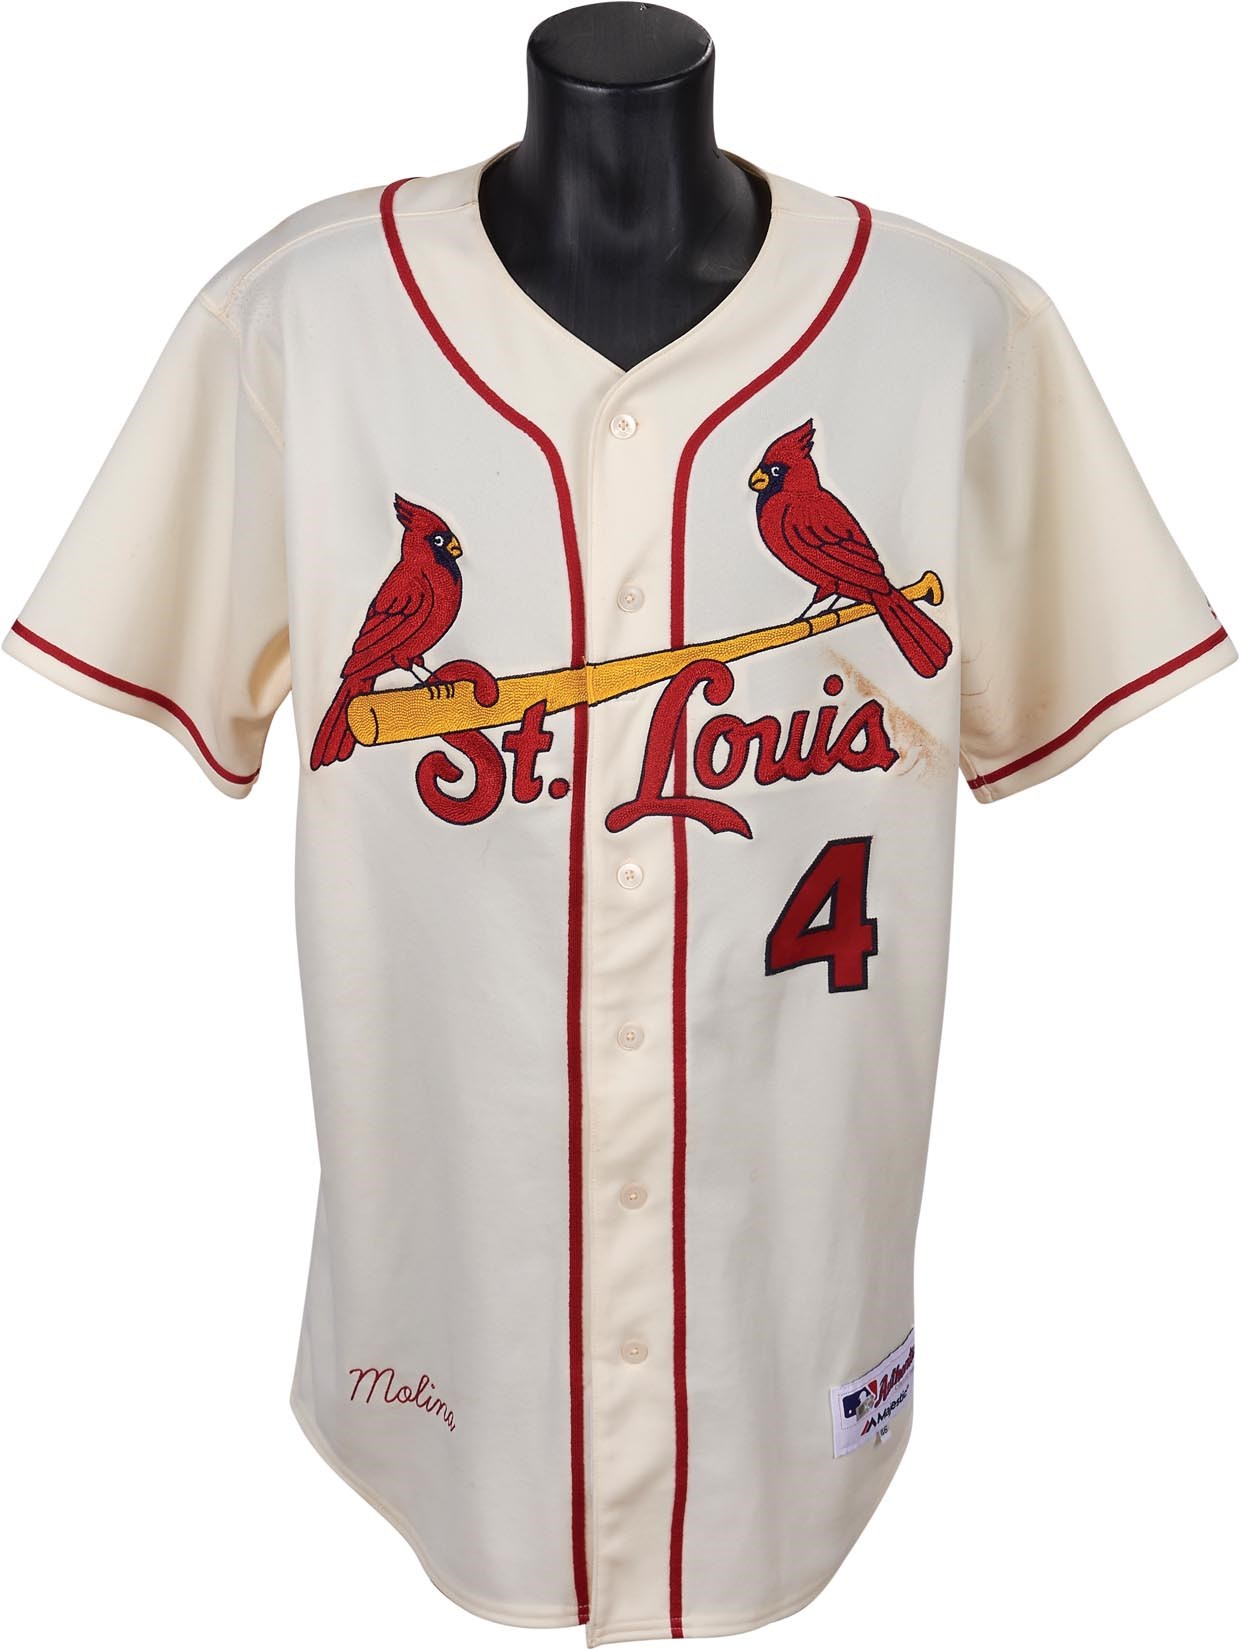 St. Louis Cardinals - 2016 Yadier Molina Game Worn 1,500th Career Hit Jersey (MLB Auth. & Photo-Matched)